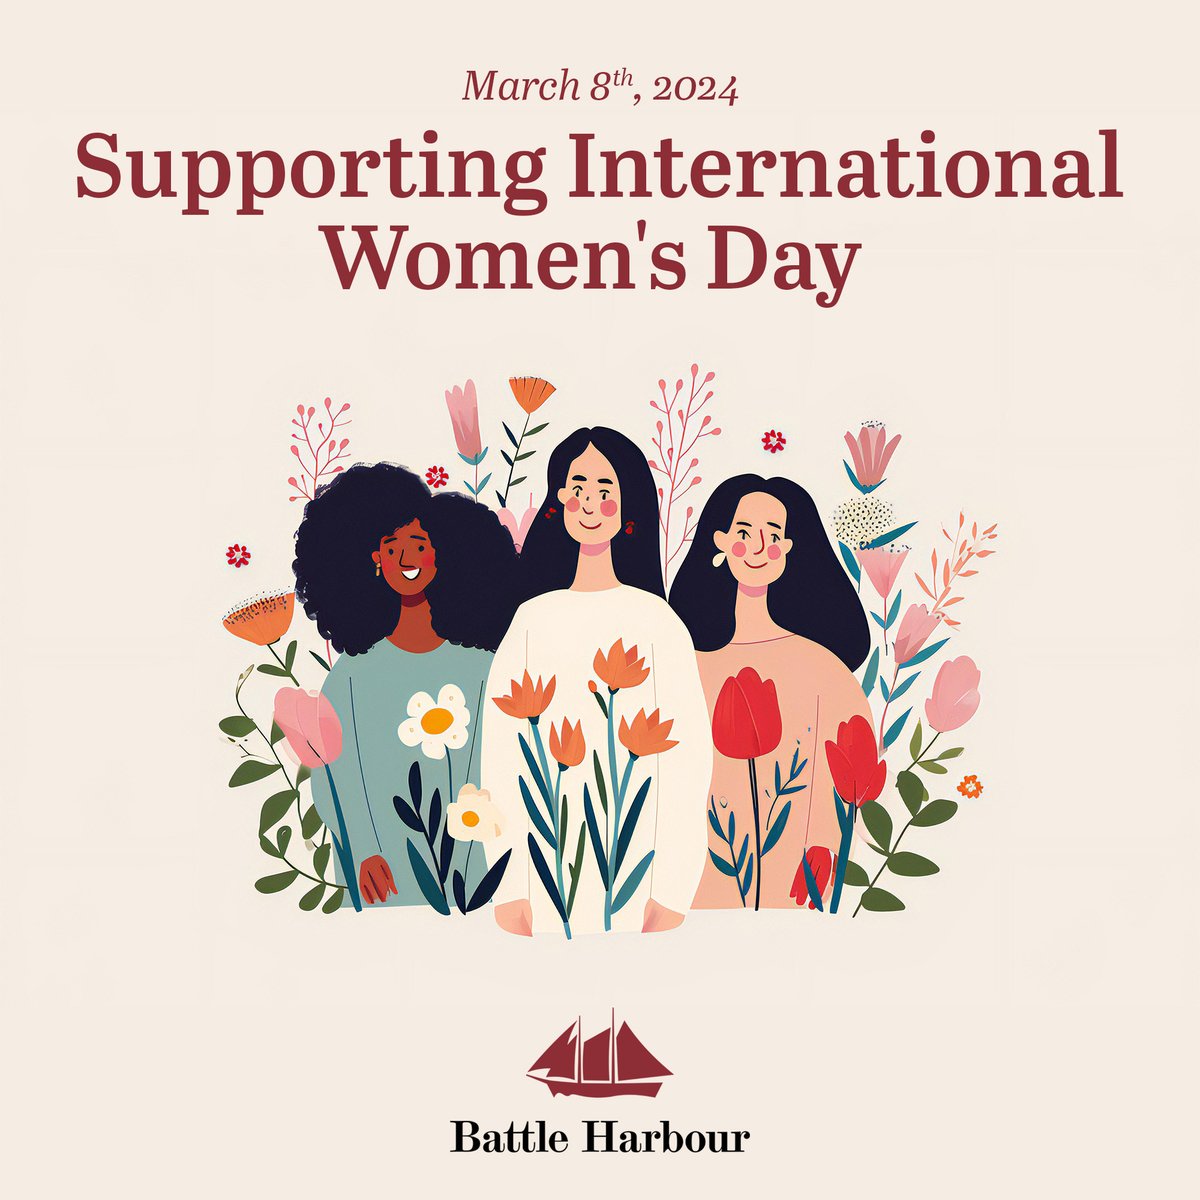 Happy International Women's Day! 🌏 Today, we celebrate all the incredible women who have left their mark throughout history and continue to inspire us every day with their strength, leadership, and wisdom.